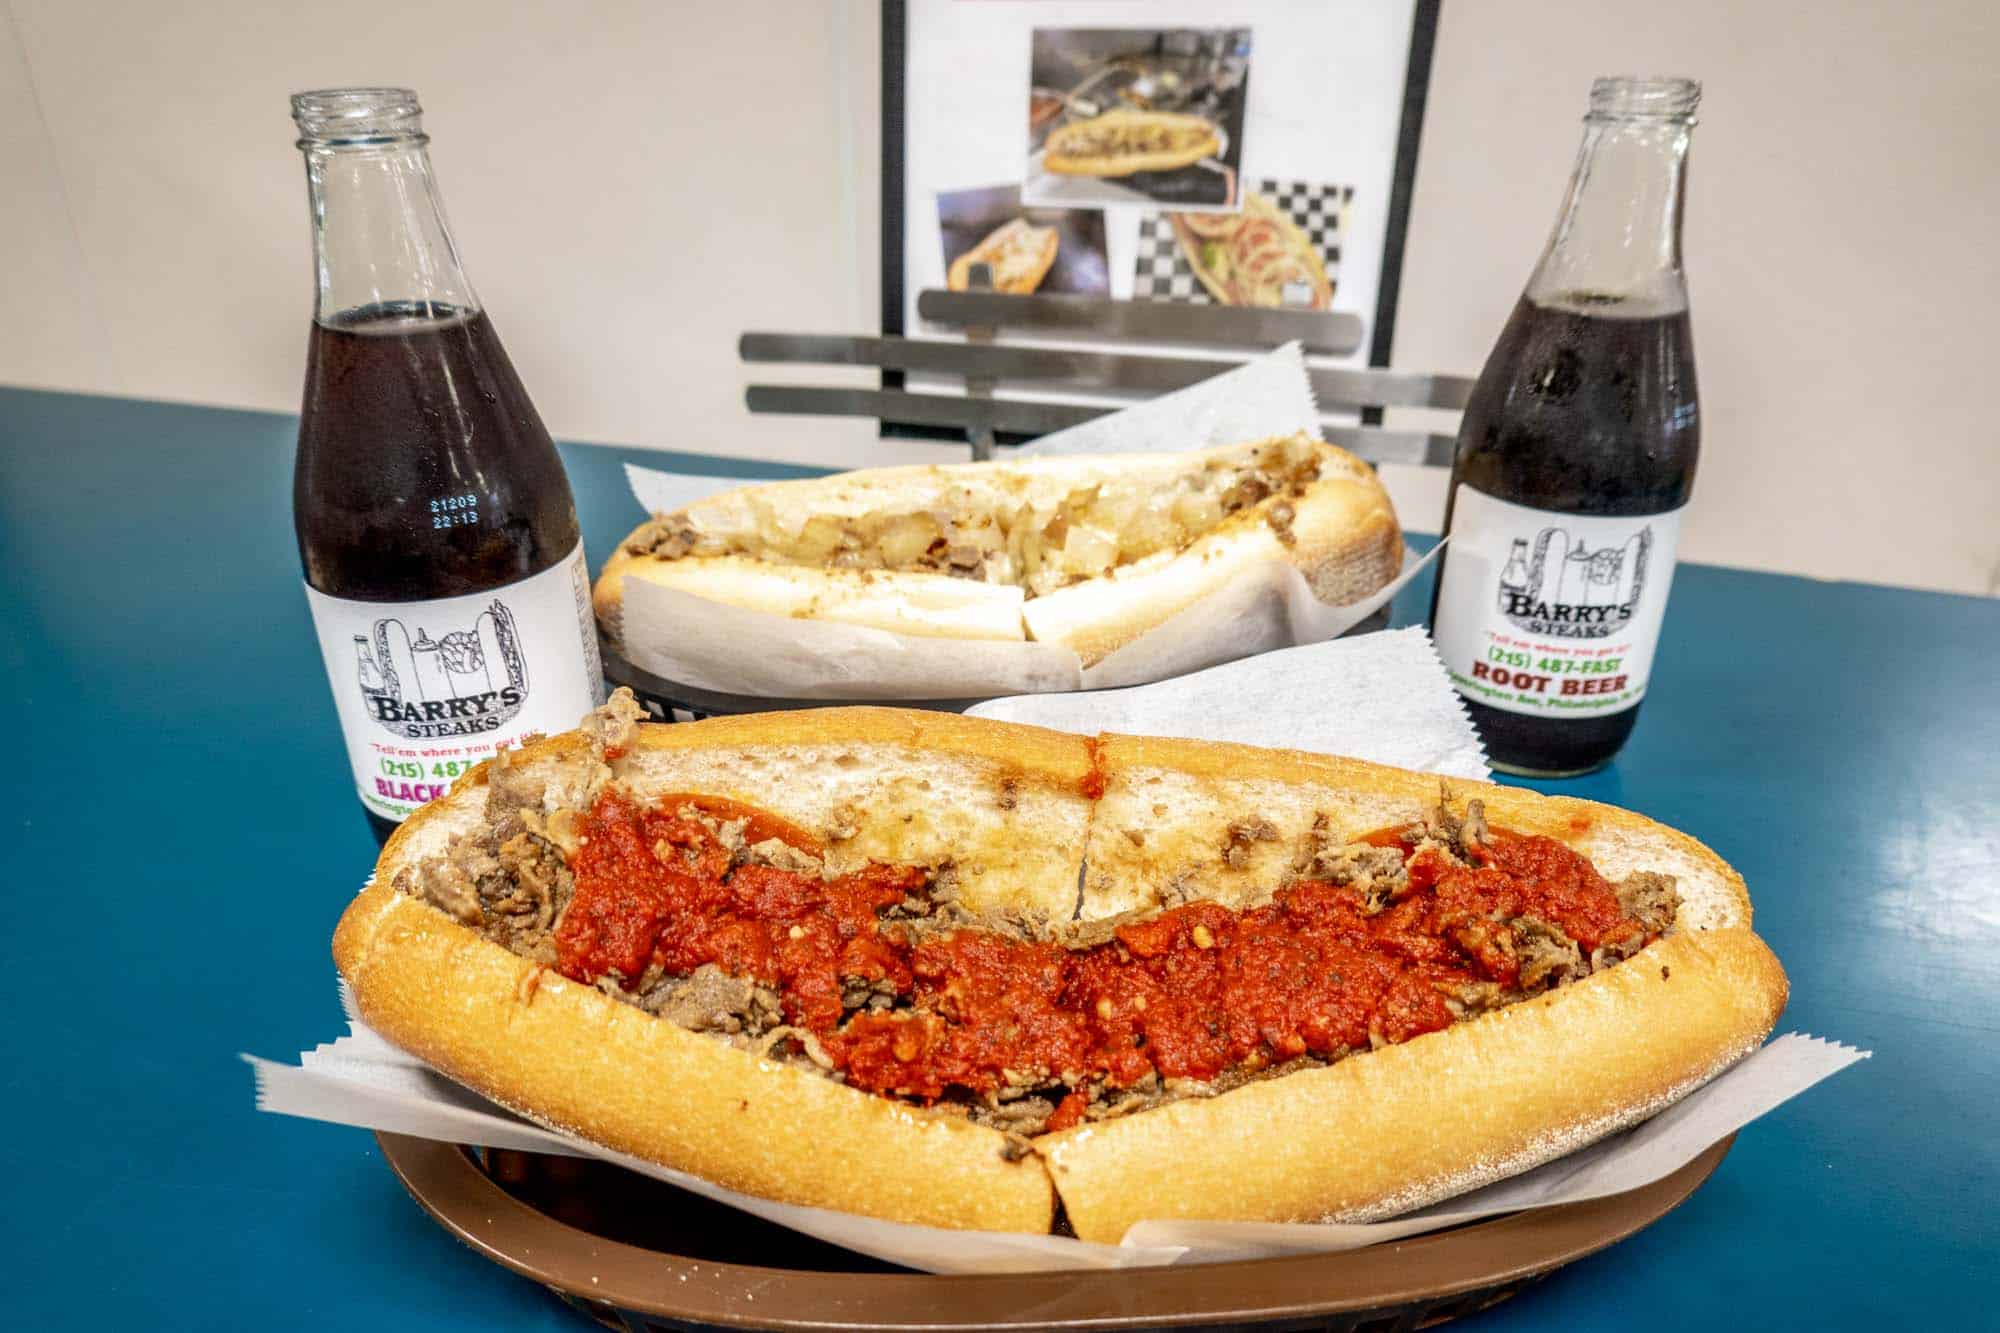 Two cheesesteaks and two soda bottles from Barry's Steaks